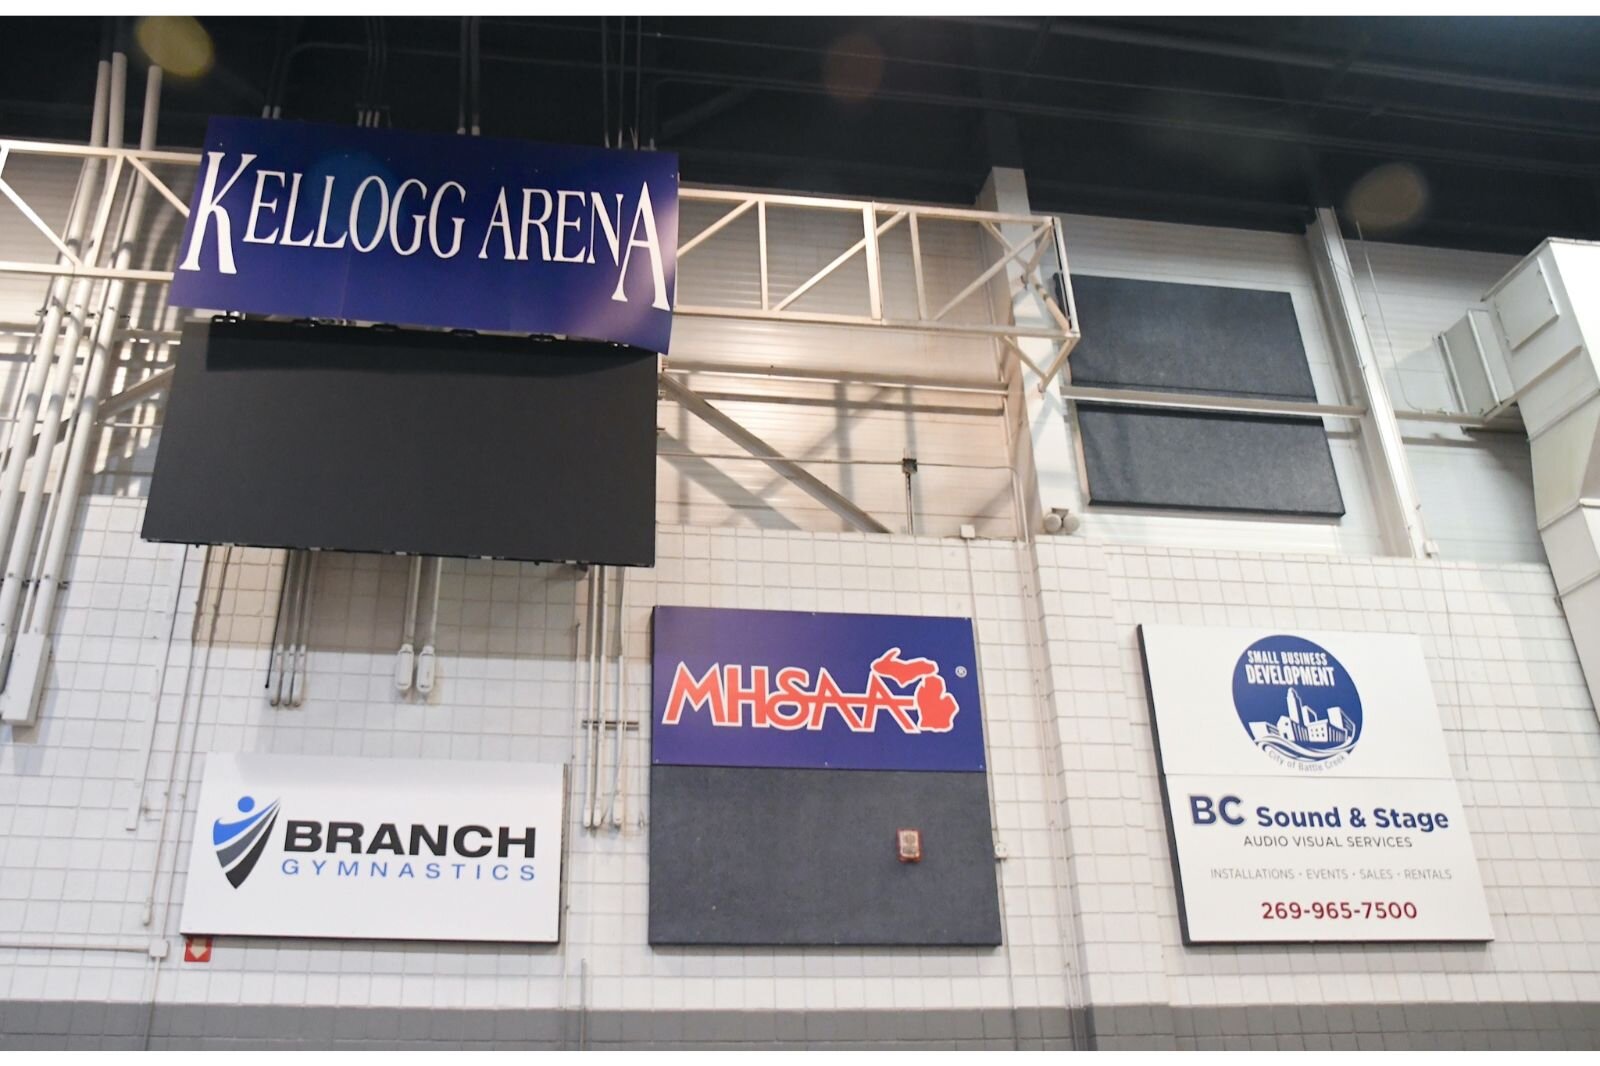 Kellogg Arena currently hosts competitions organized by Branch Gymnastics and the Michigan High School Athletic Association (MHSAA).